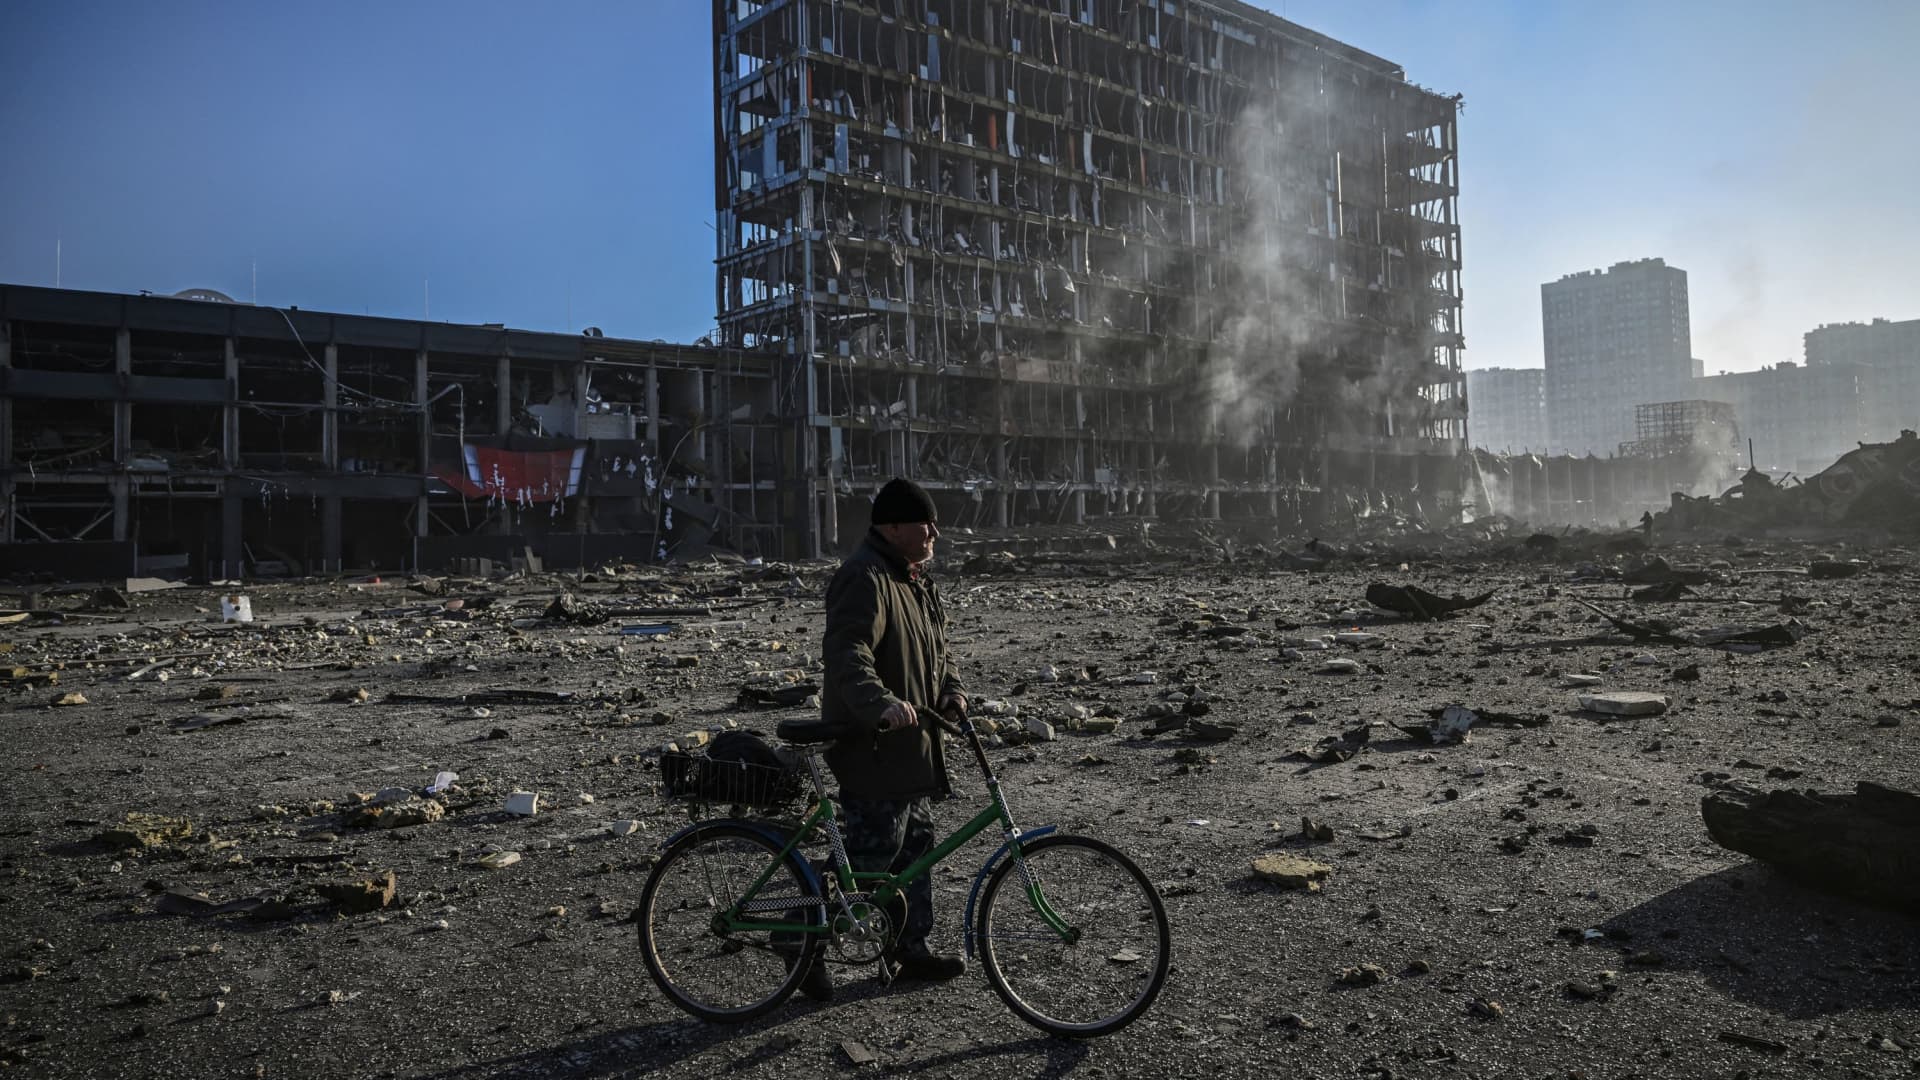 A man with his bicycle walks between debris outside the destroyed Retroville shopping mall in a residential district, after a Russian attack on the Ukranian capital Kyiv on March 21, 2022.